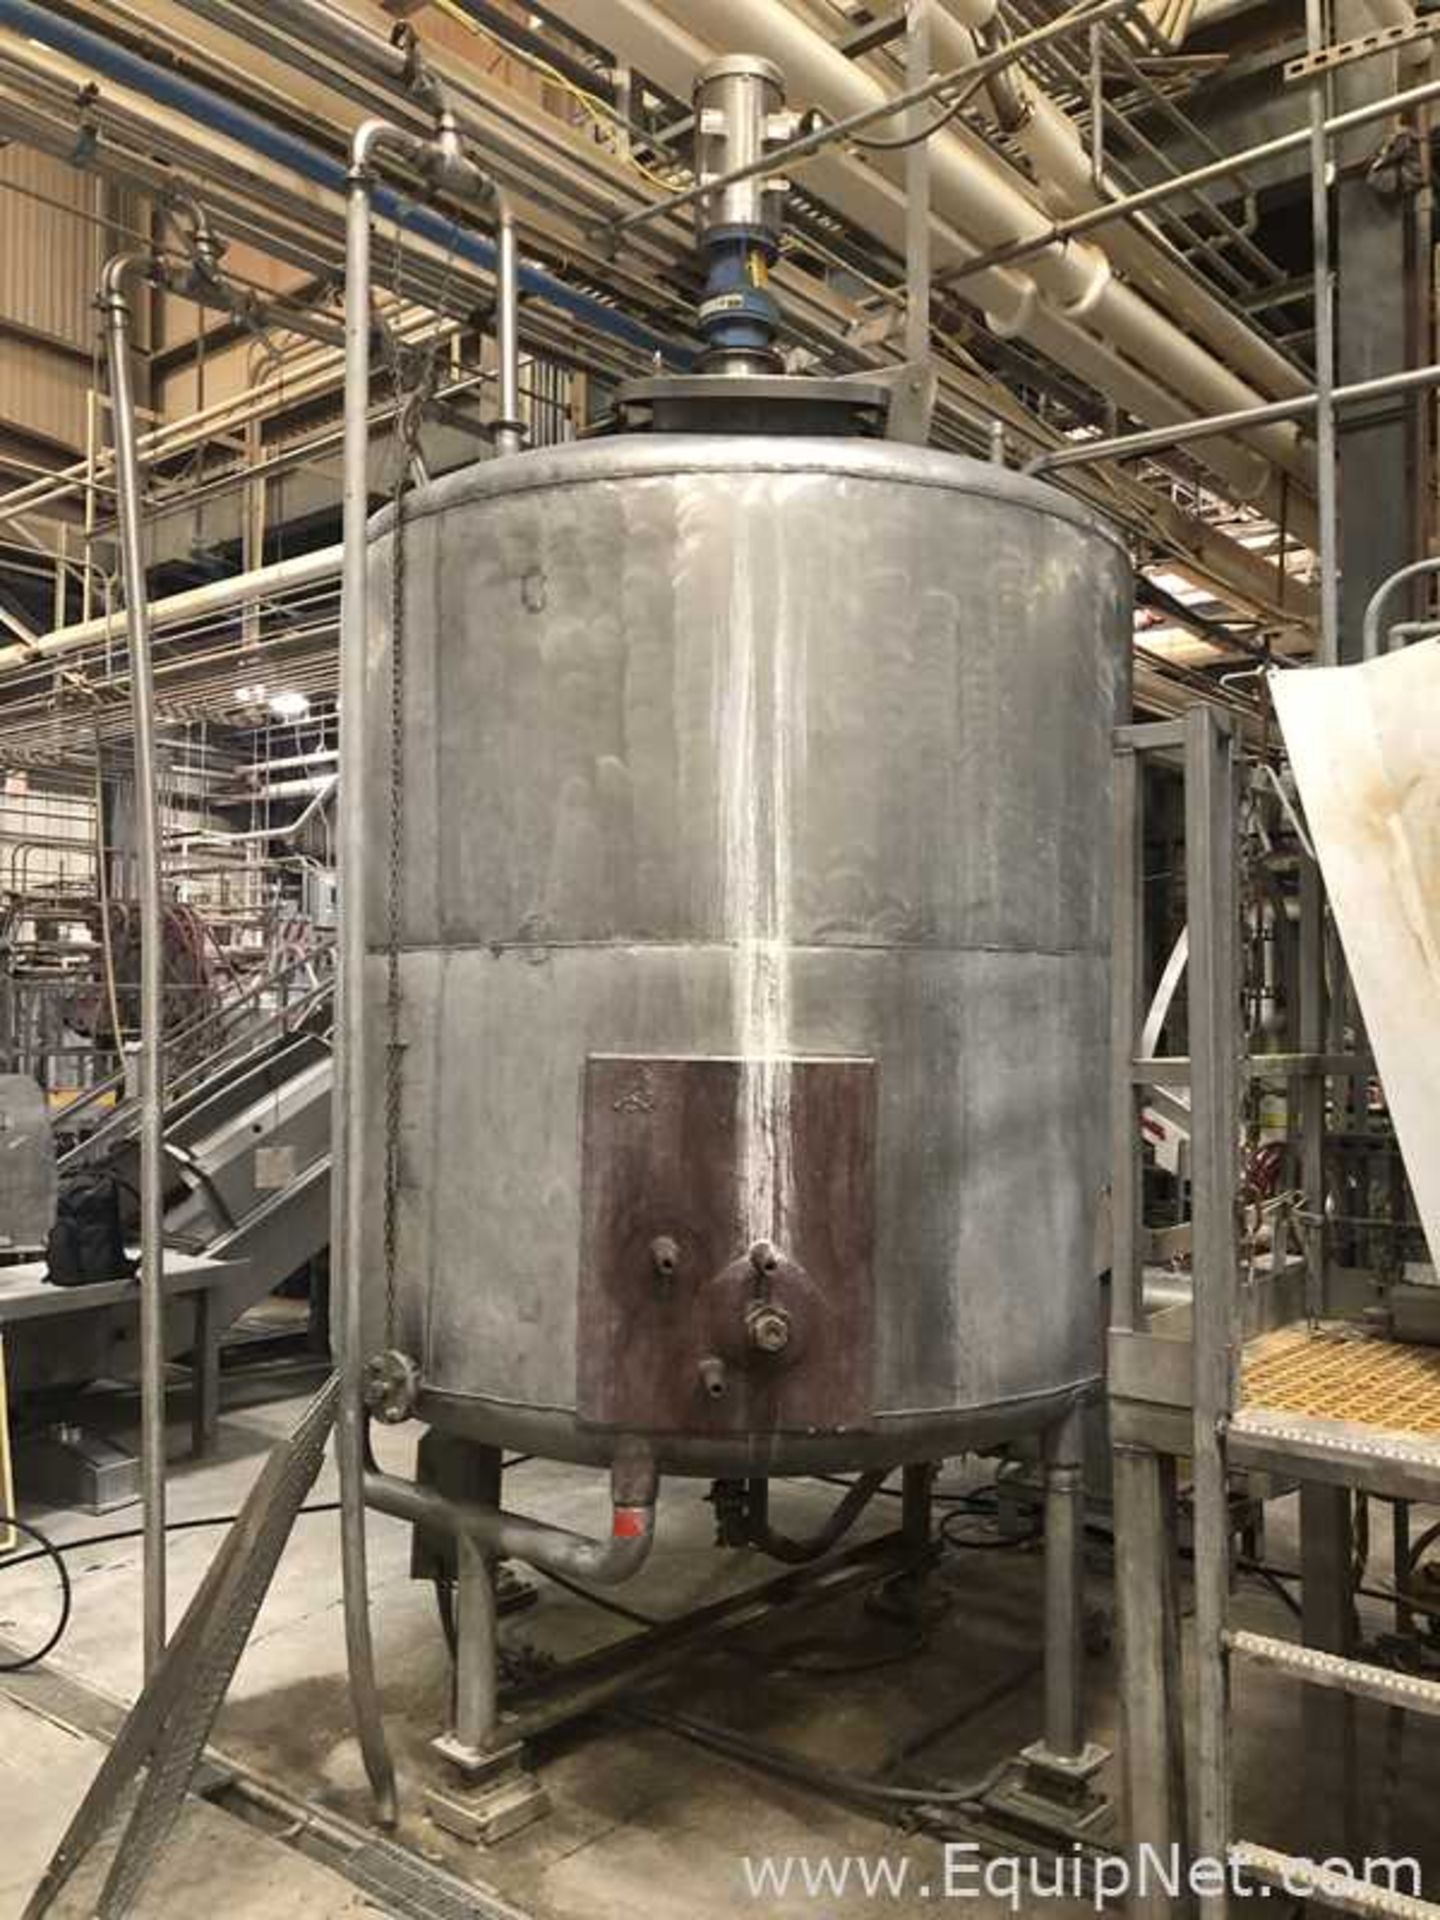 Stainless Steel 1000 Gallons Tank - Image 2 of 6